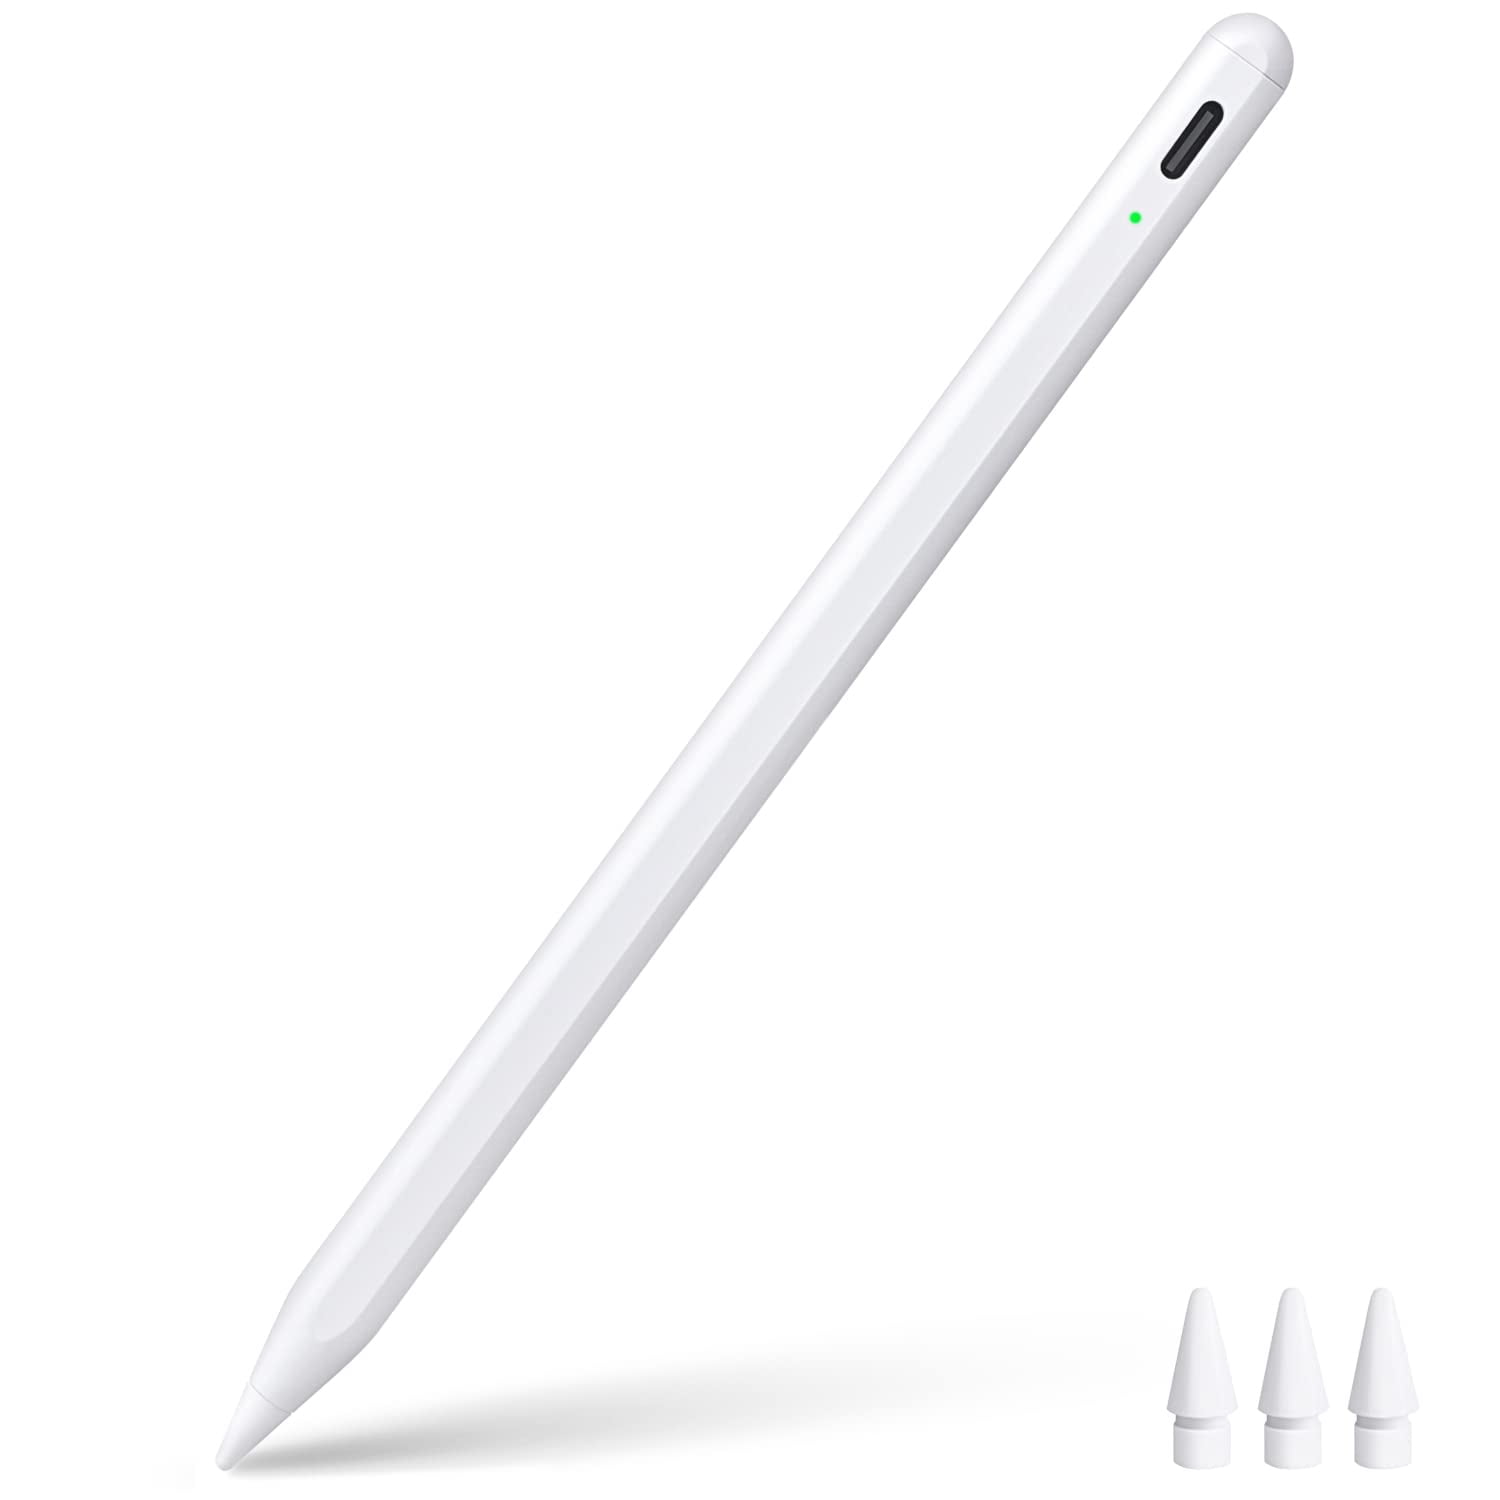 Metapen iPad Pencil A14 Wireless Magnetic Charge丨Best Alternative to Apple  Pencil 2nd Gen丨Stylus Pen Dedicated for Apple iPad Air 5/4, iPad Pro 12.9